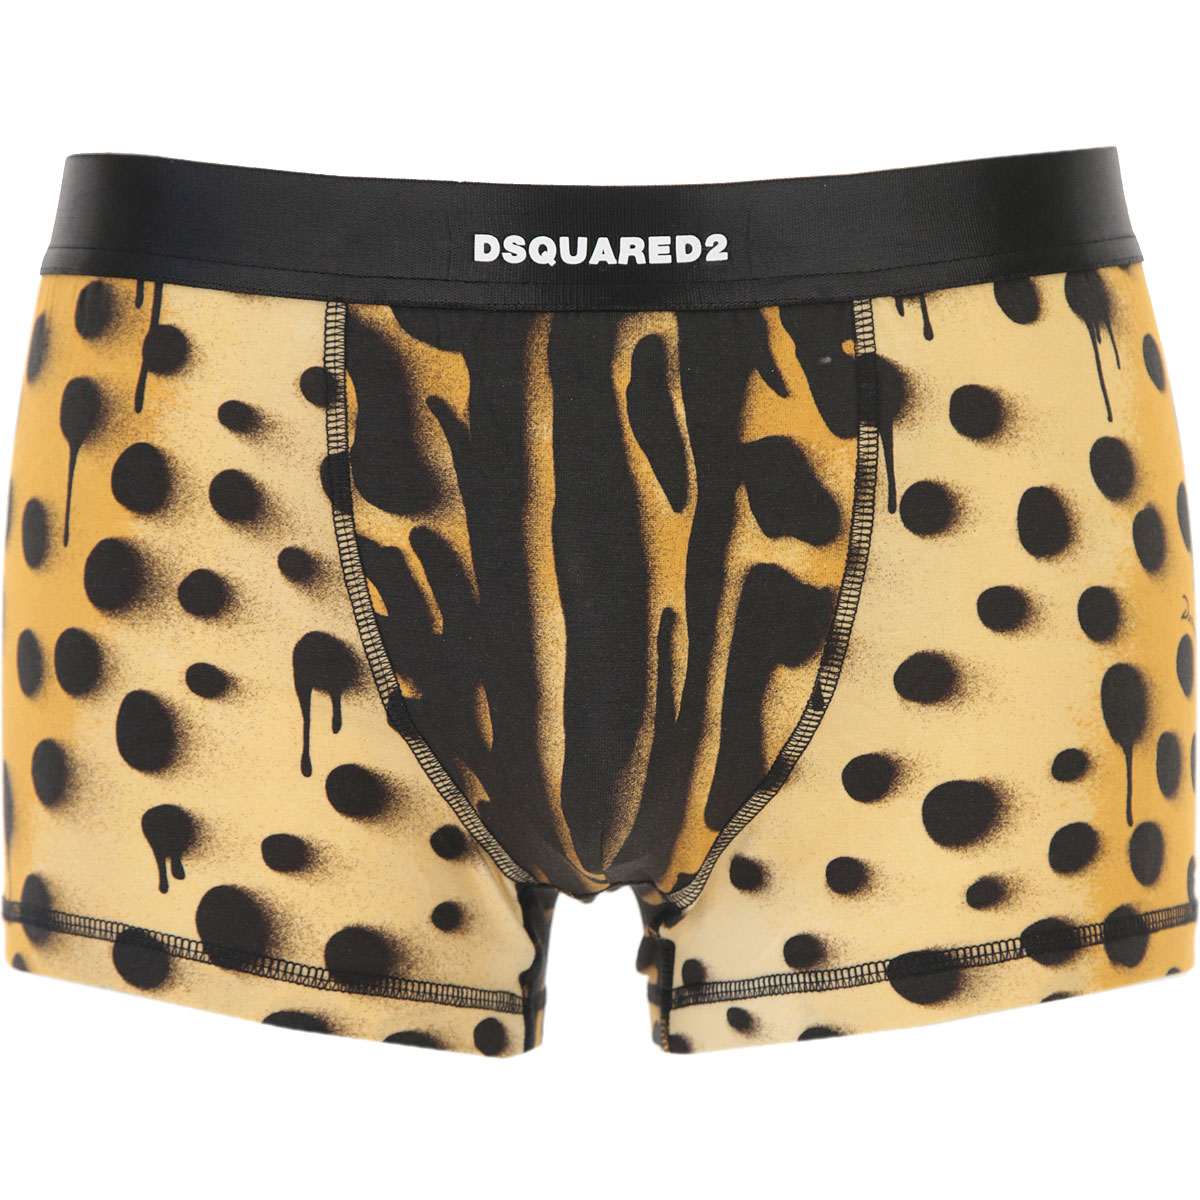 Mens Underwear Dsquared2, Style code: d9lc63880-258-